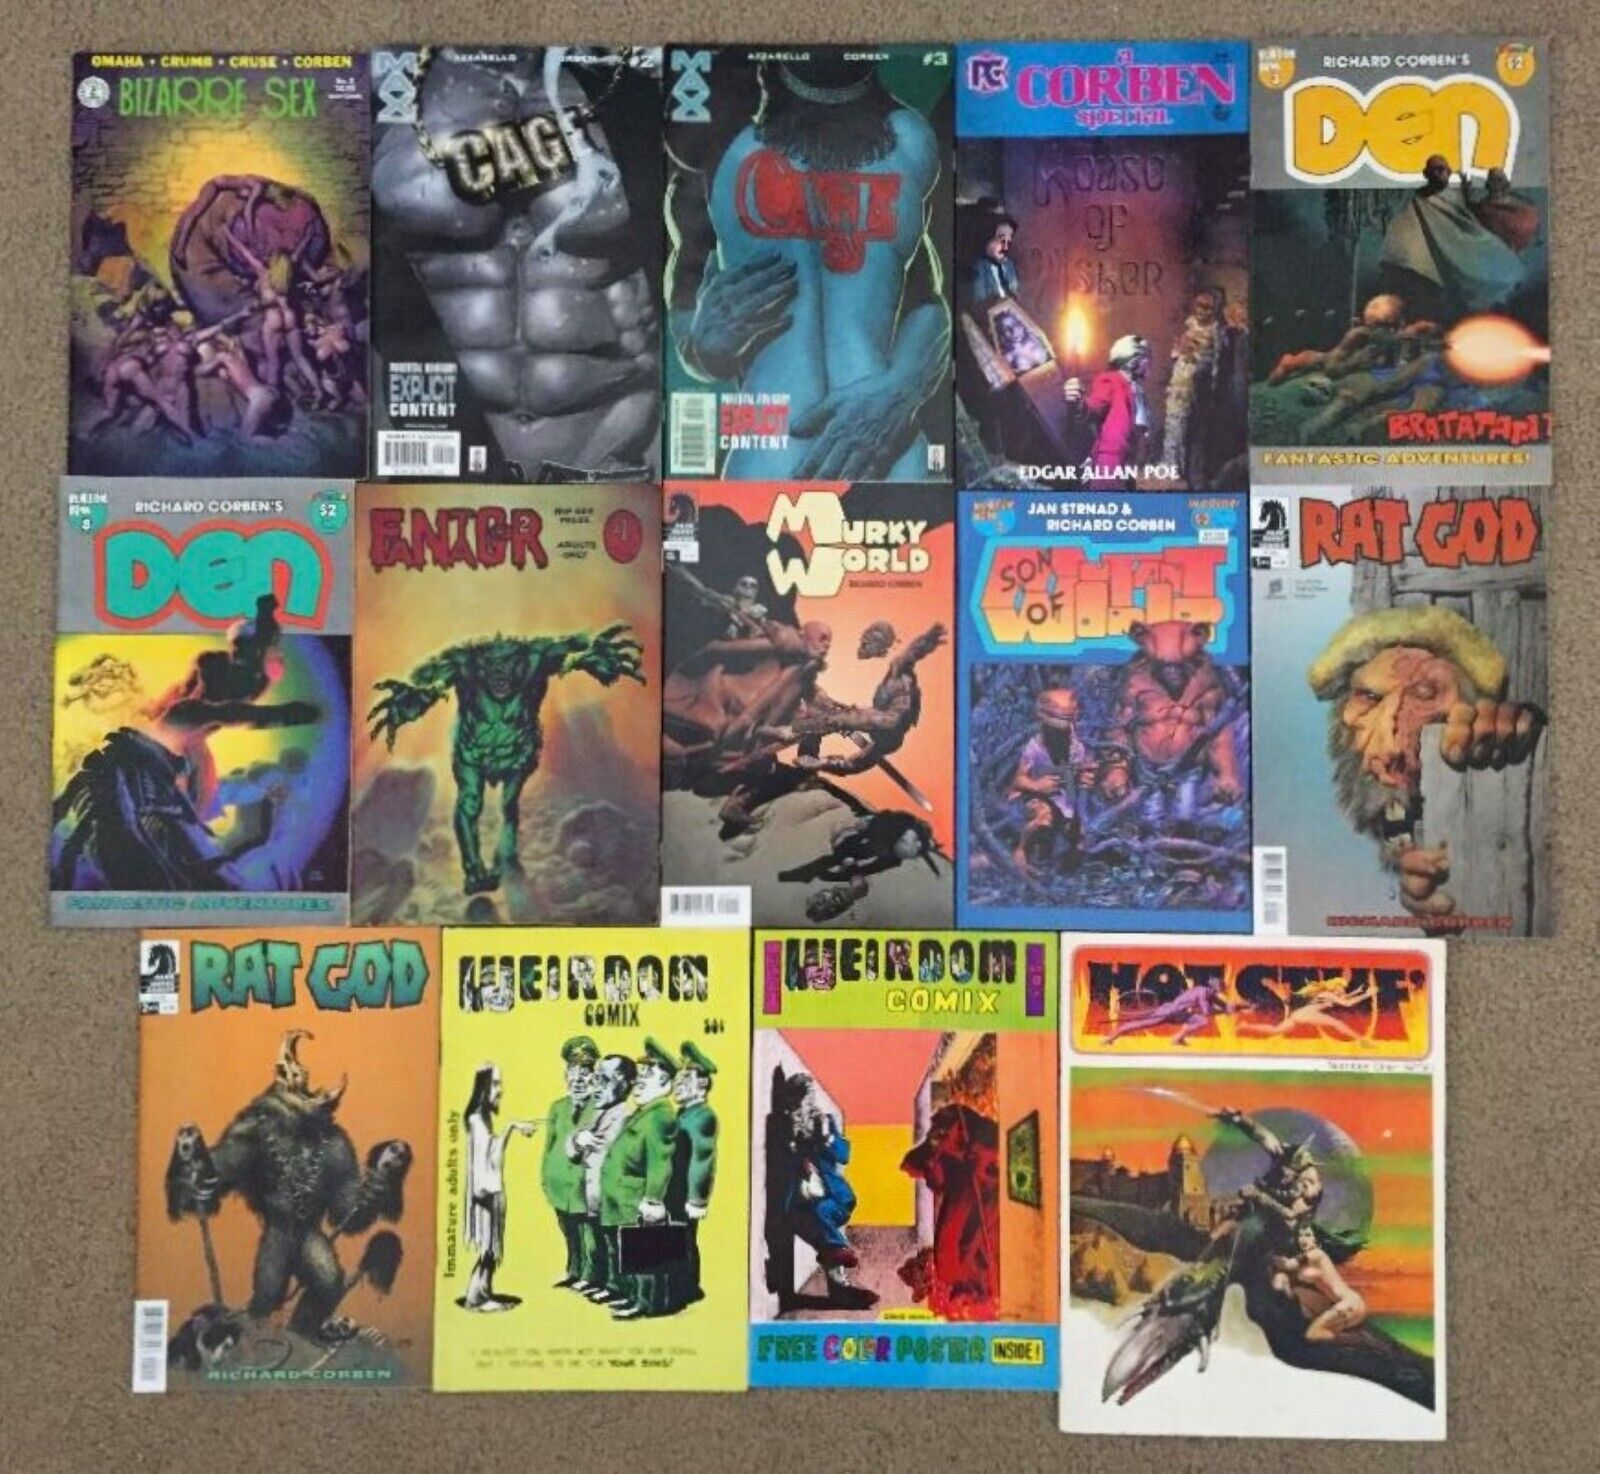 RICHARD  CORBEN  UNDERGROUND  COMIC  LOT  OF  14  ISSUES ......... FREE SHIPPING